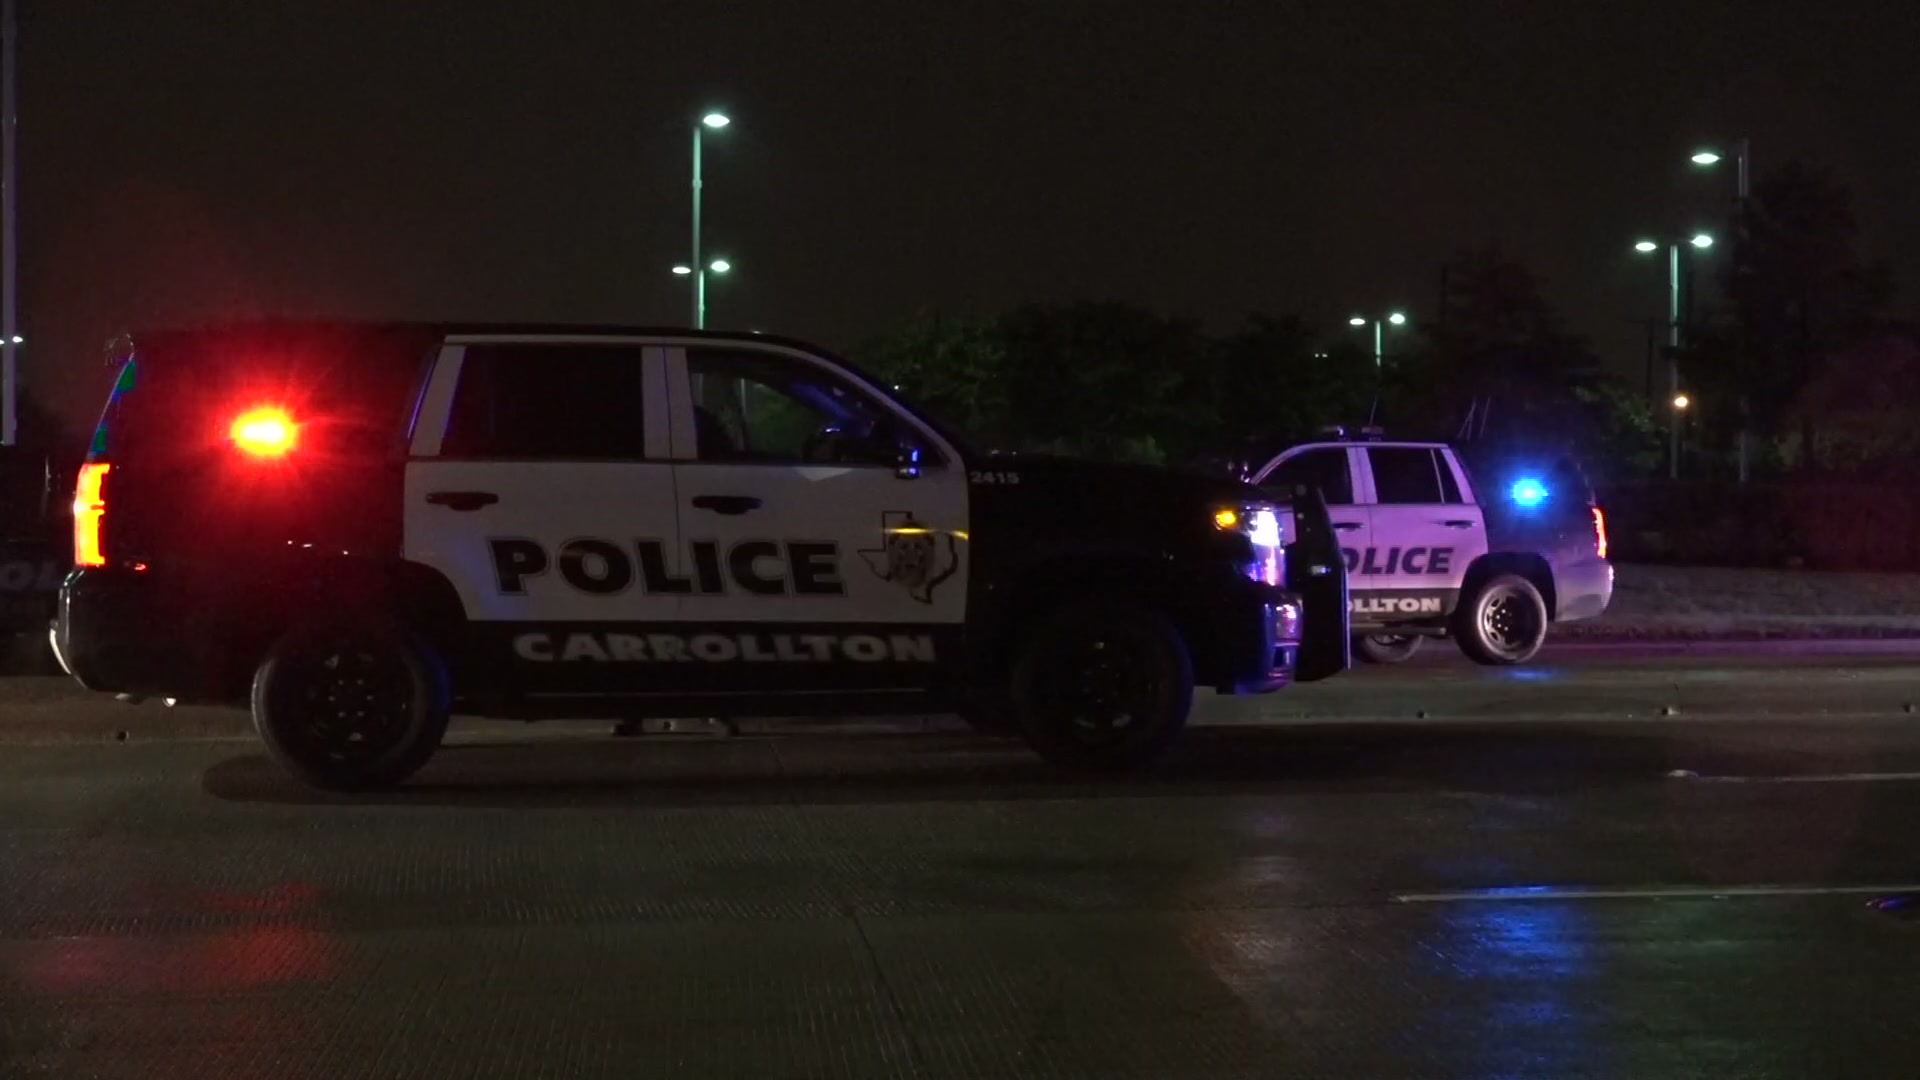 Raw: 1 Person Dead After Hit-and-Run in Carrollton